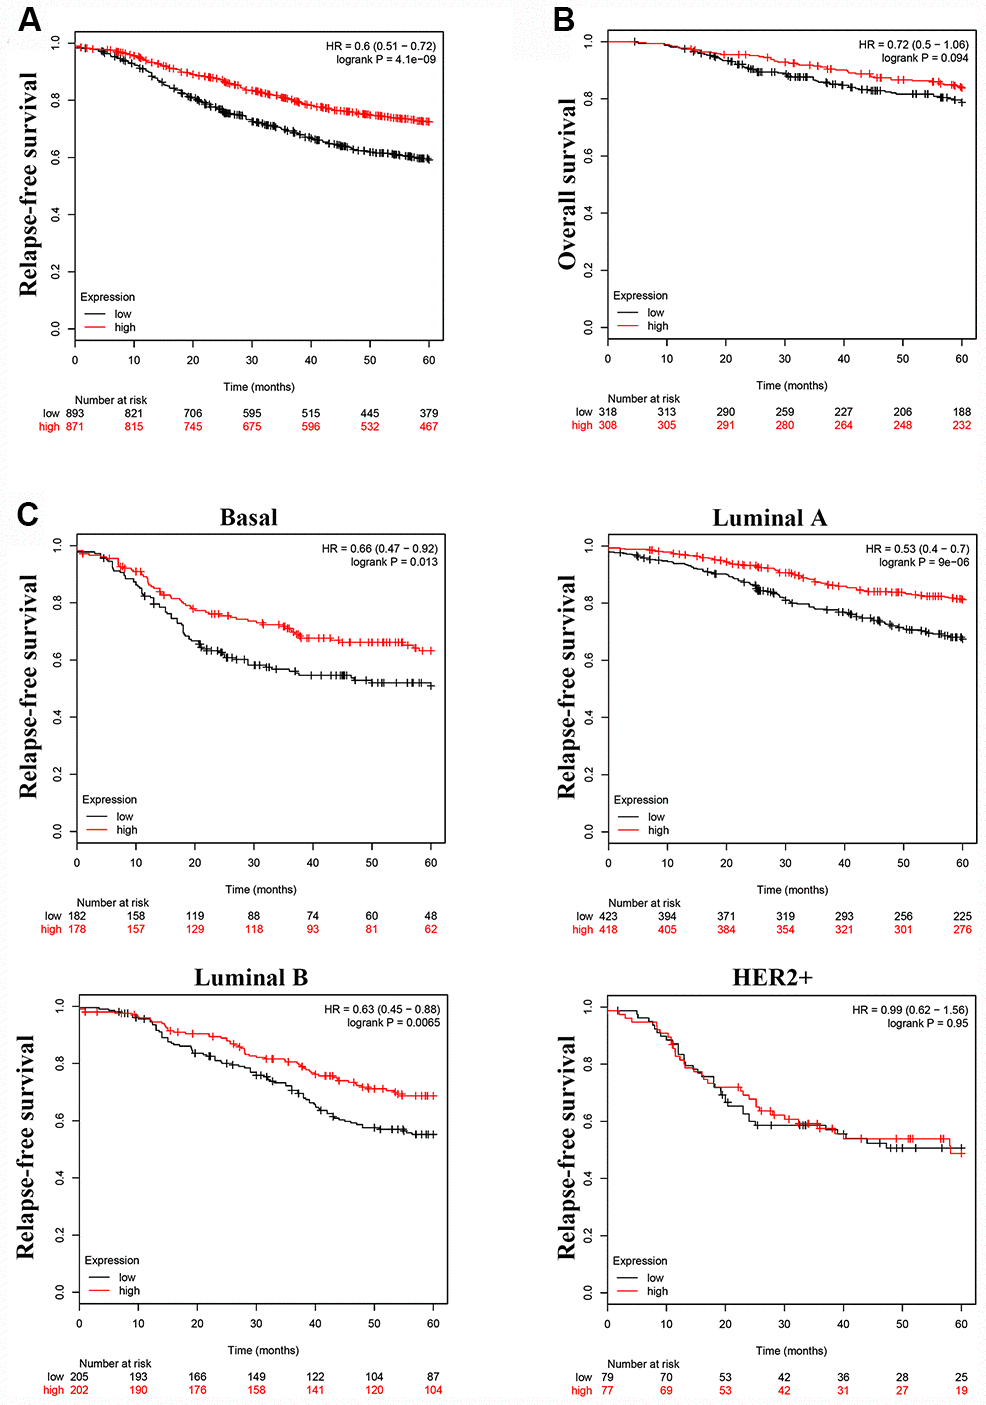 High LINC00899 levels correlate with a better prognosis in breast cancer patients. (A–C) Kaplan–Meier survival curve analysis performed using KM plotter. Breast cancer patients were divided into two equal groups based on median expression value of LINC00899. The hazard ratio (HR) and log-rank p-value comparing the two groups are shown. Low and high risks are indicated in black and red, respectively.